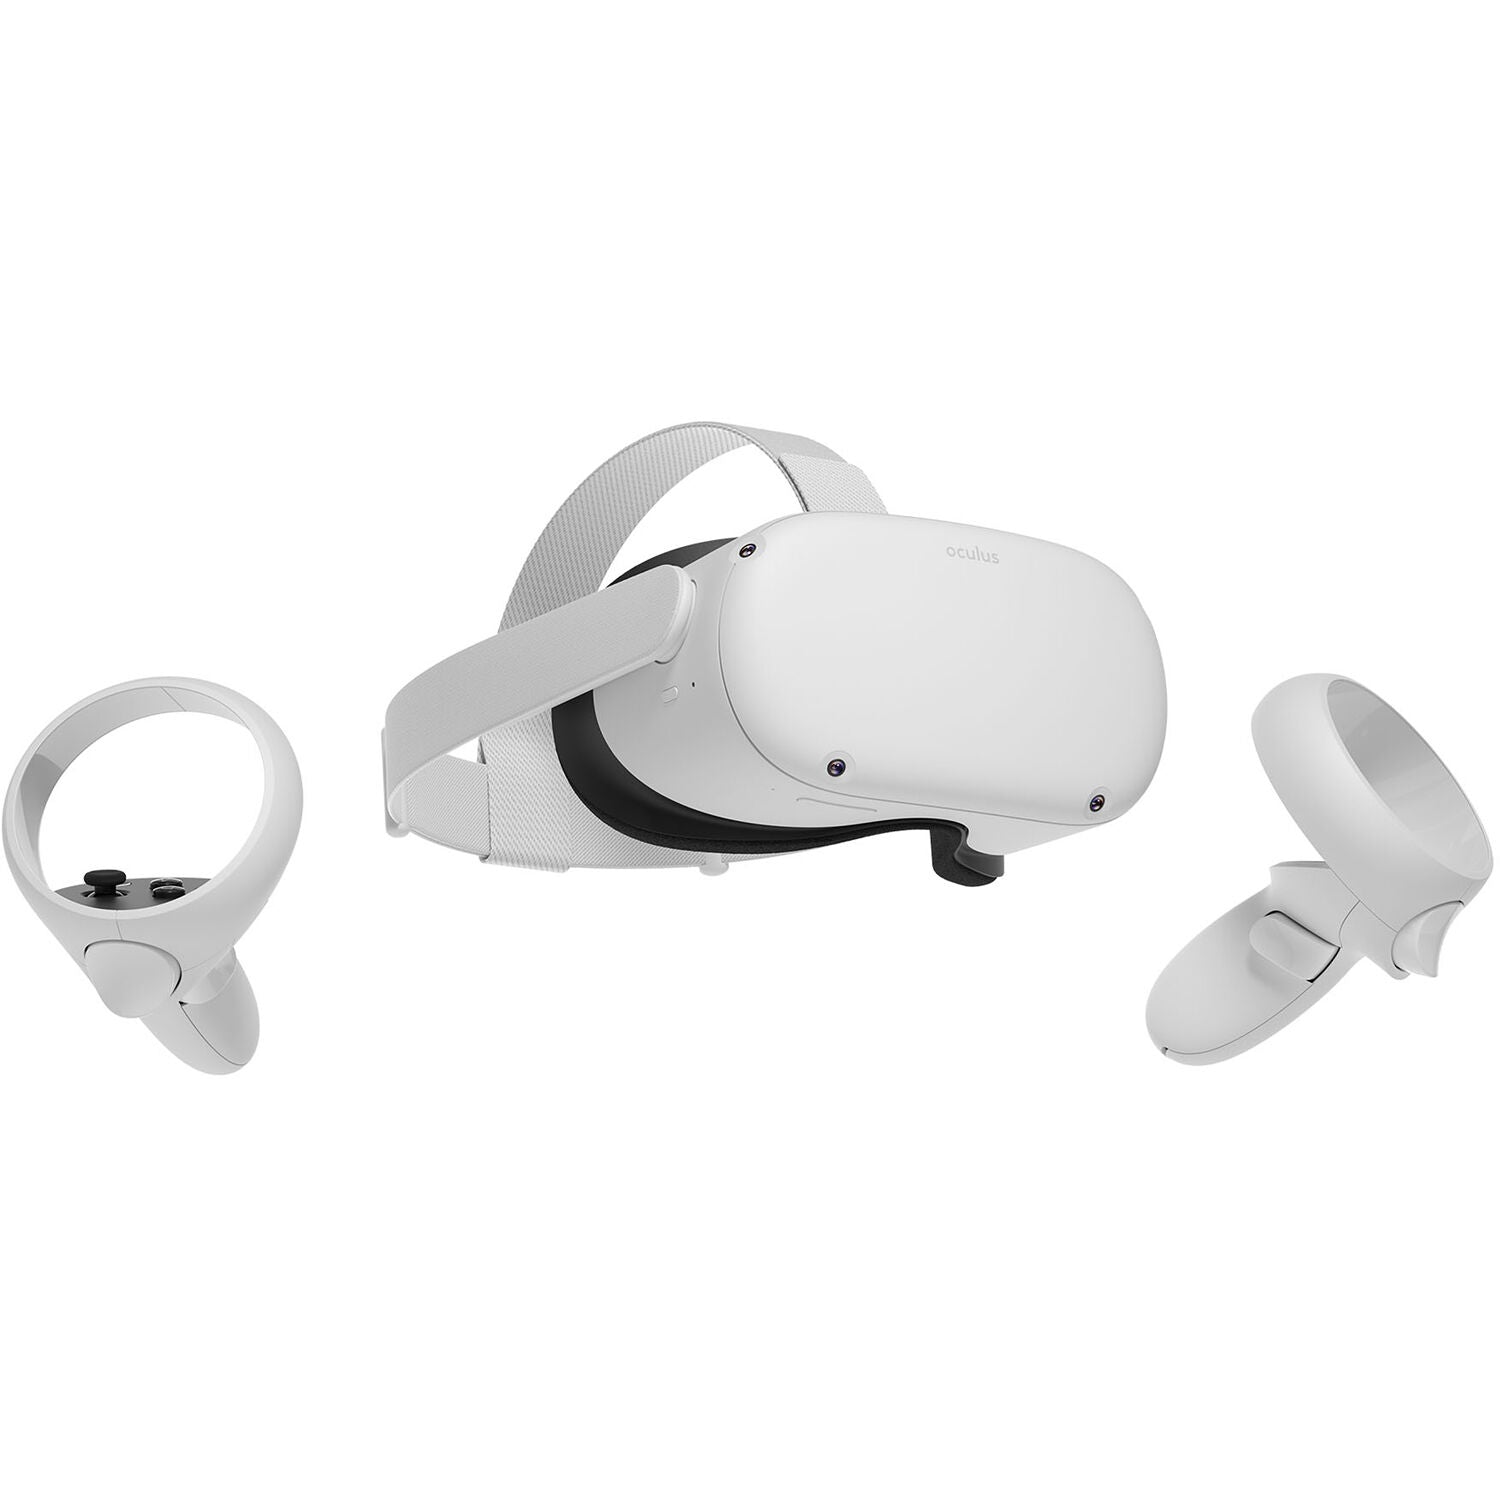 Oculus Quest 2 Advanced All in One VR Headset Price in Dubai